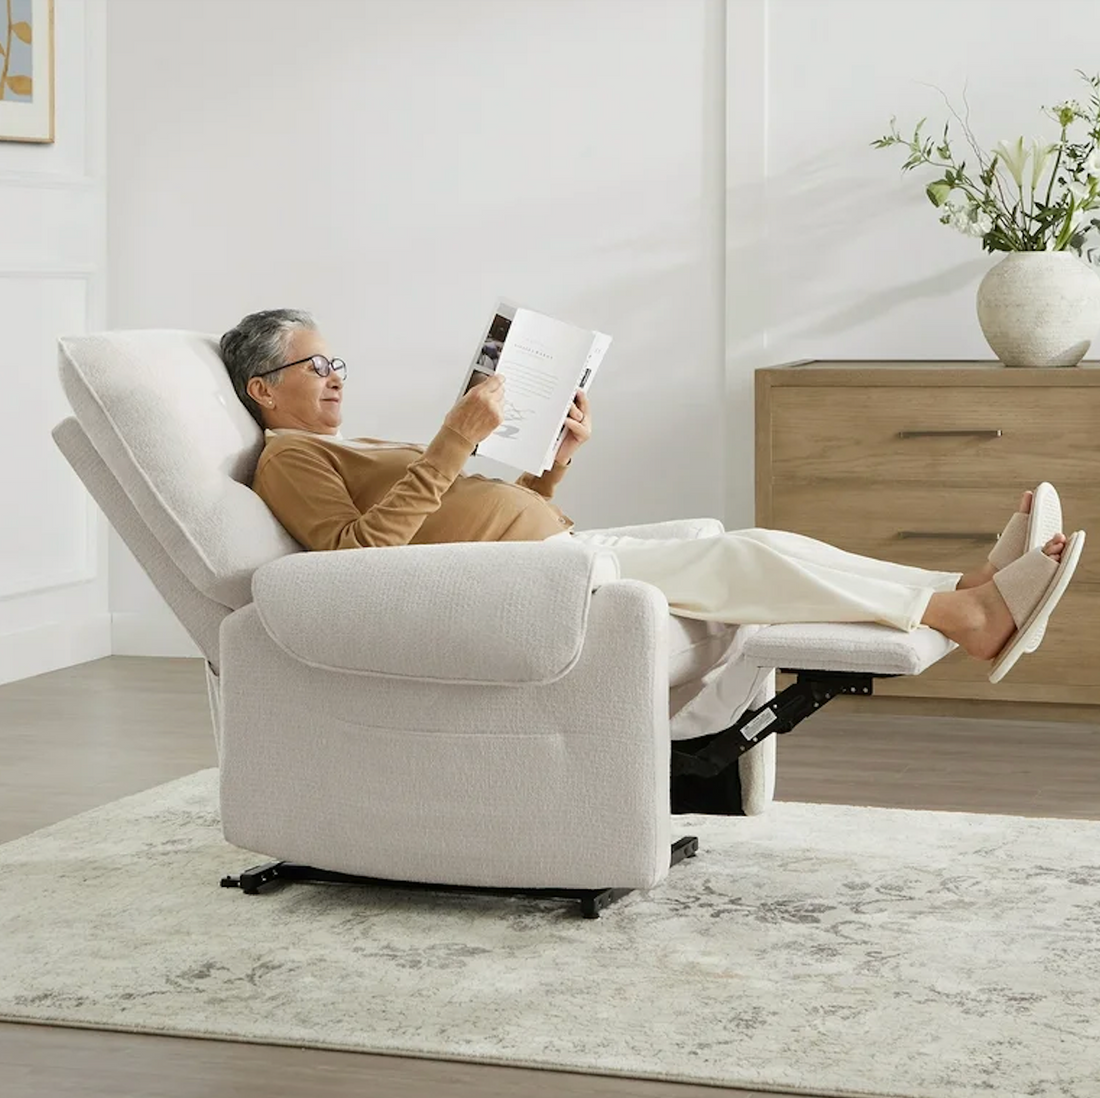 How to Choose a Recliner Sofa for Elderly Family Members